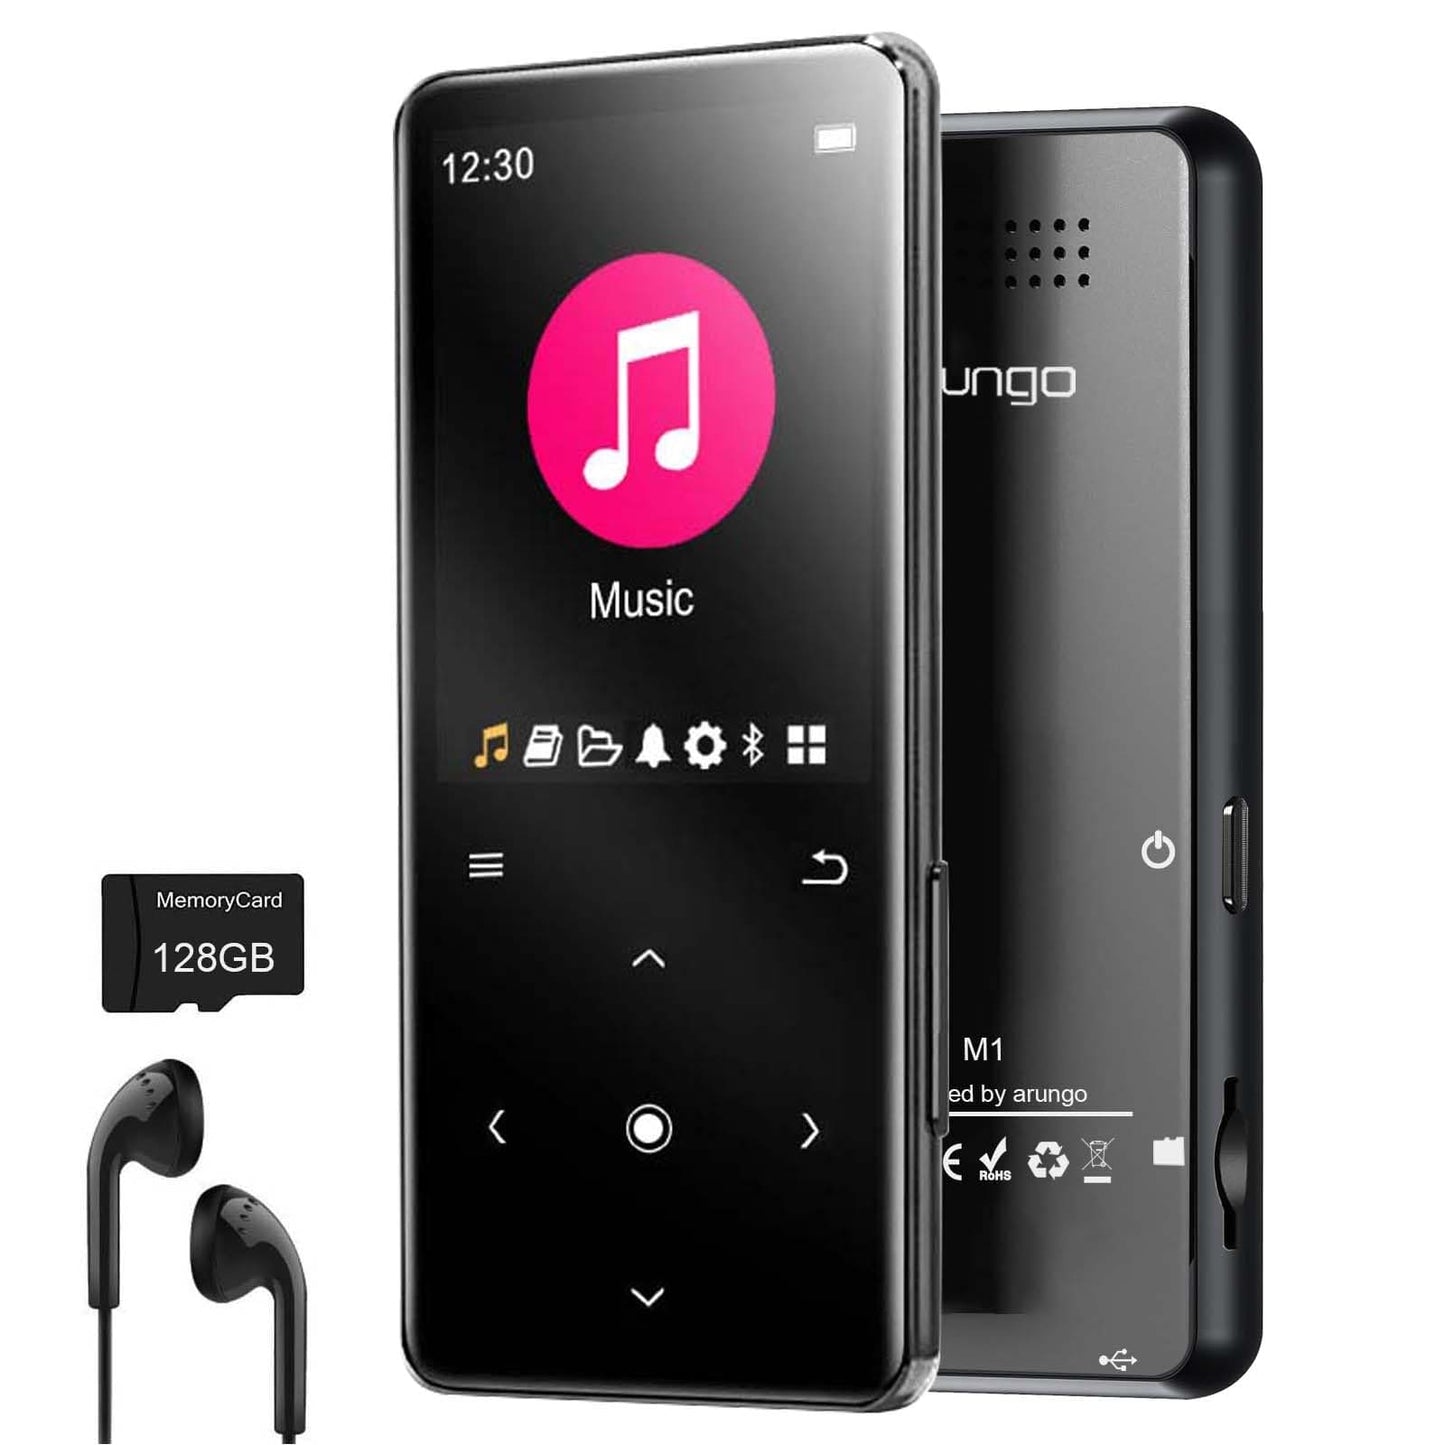 128GB MP3 Player with Bluetooth 5.2, Music Player Built-in Speaker, FM Radio, Voice Recorder, HiFi Sound, E-Book Function, Earphones Included